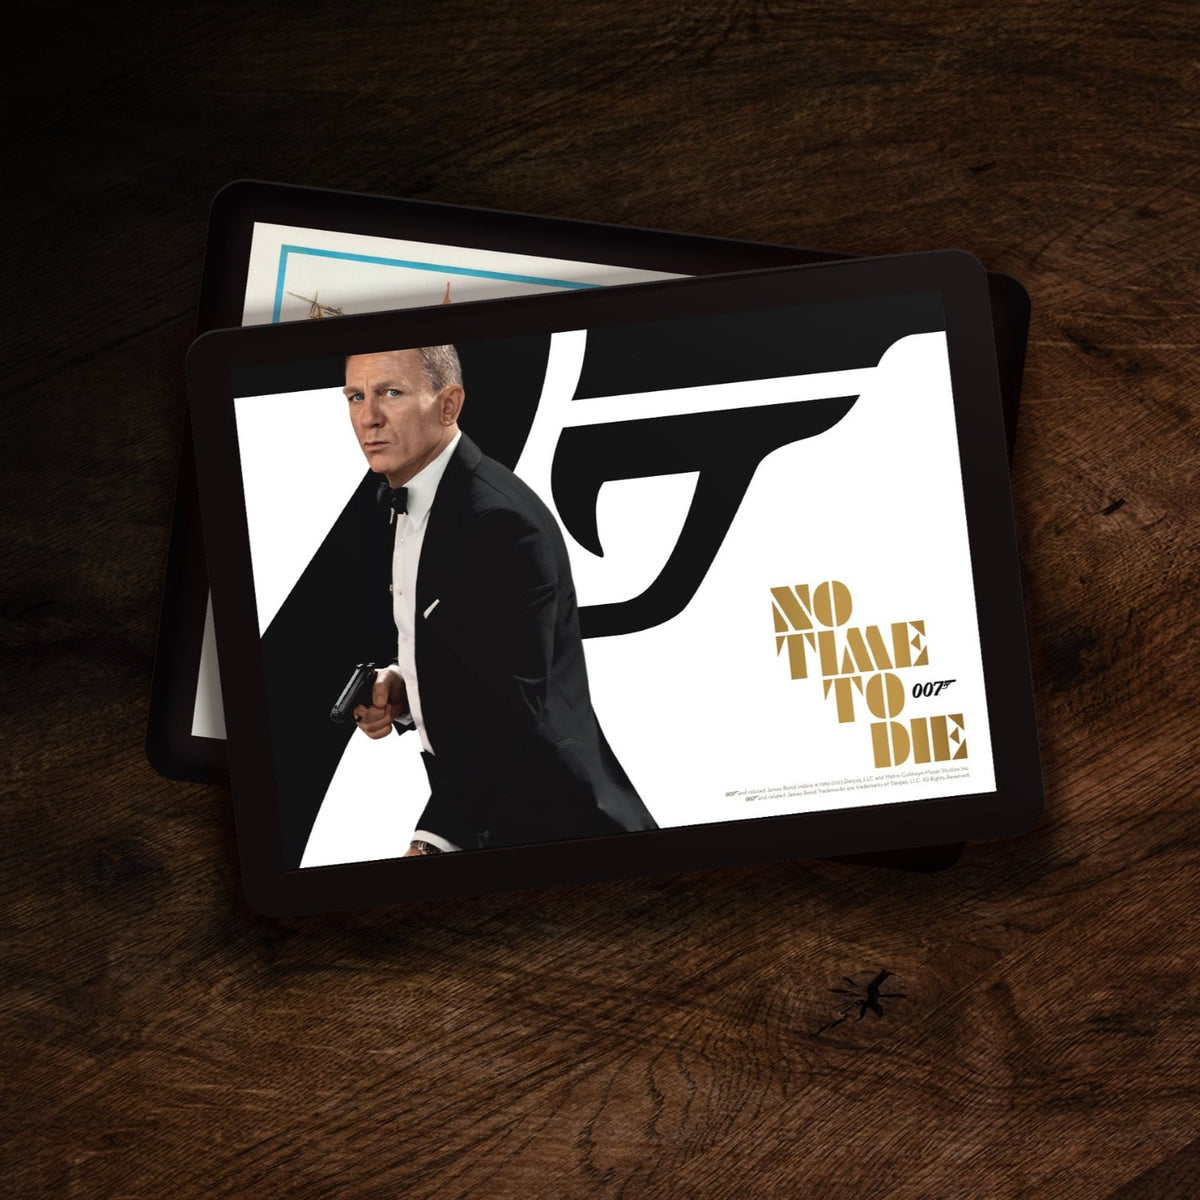 James Bond Placemat - No Time To Die Edition